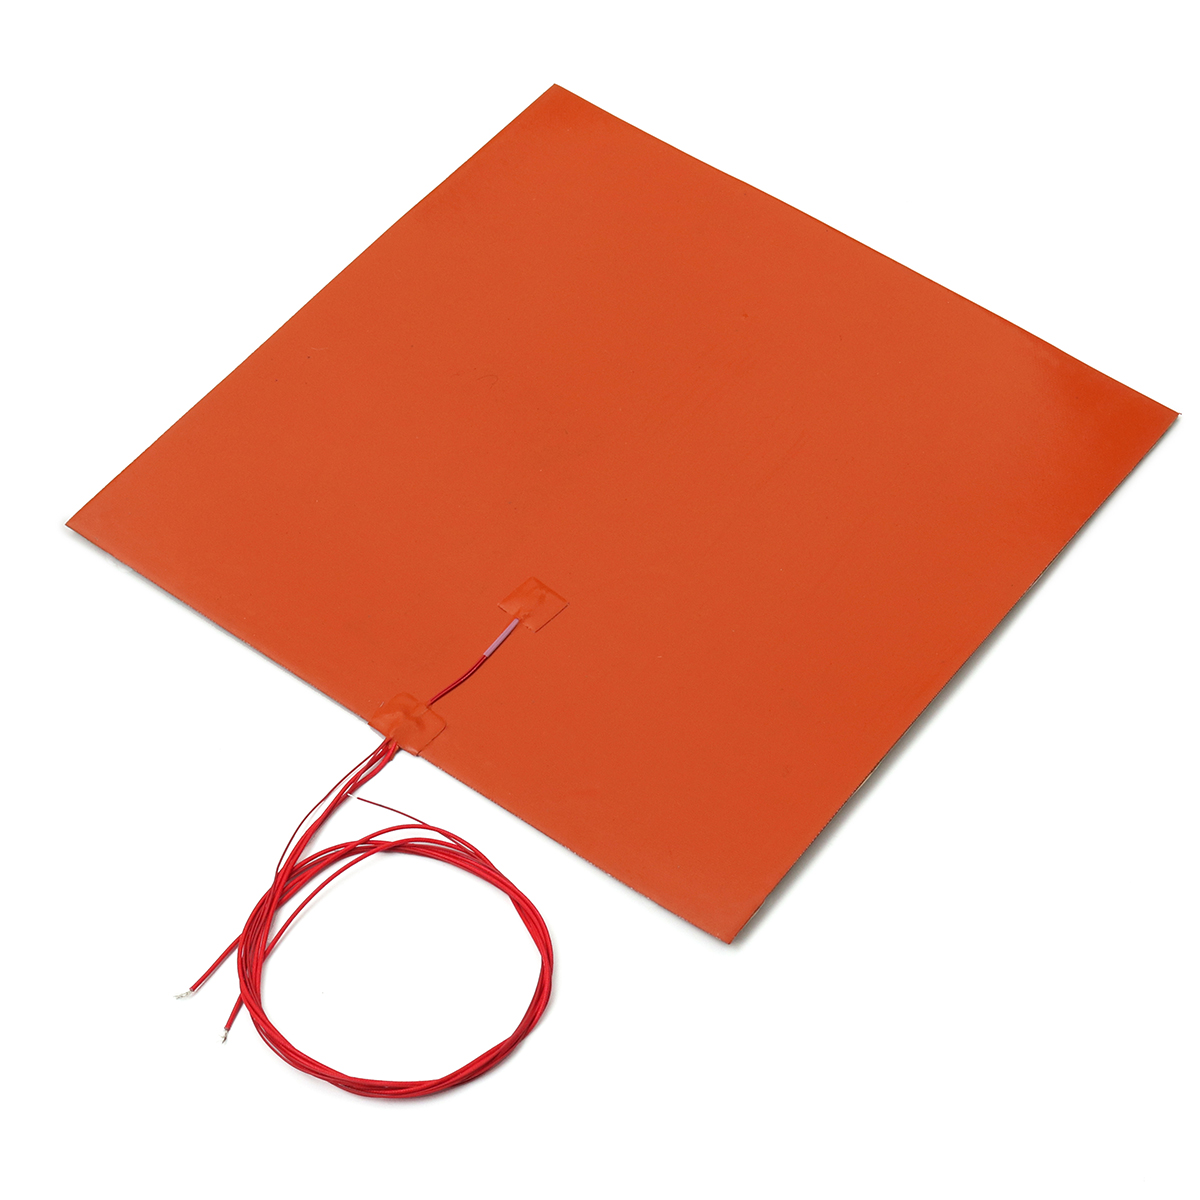 1400w 240V 400*400mm Silicone Heater Bed Pad For 3D Printer Without Hole 8